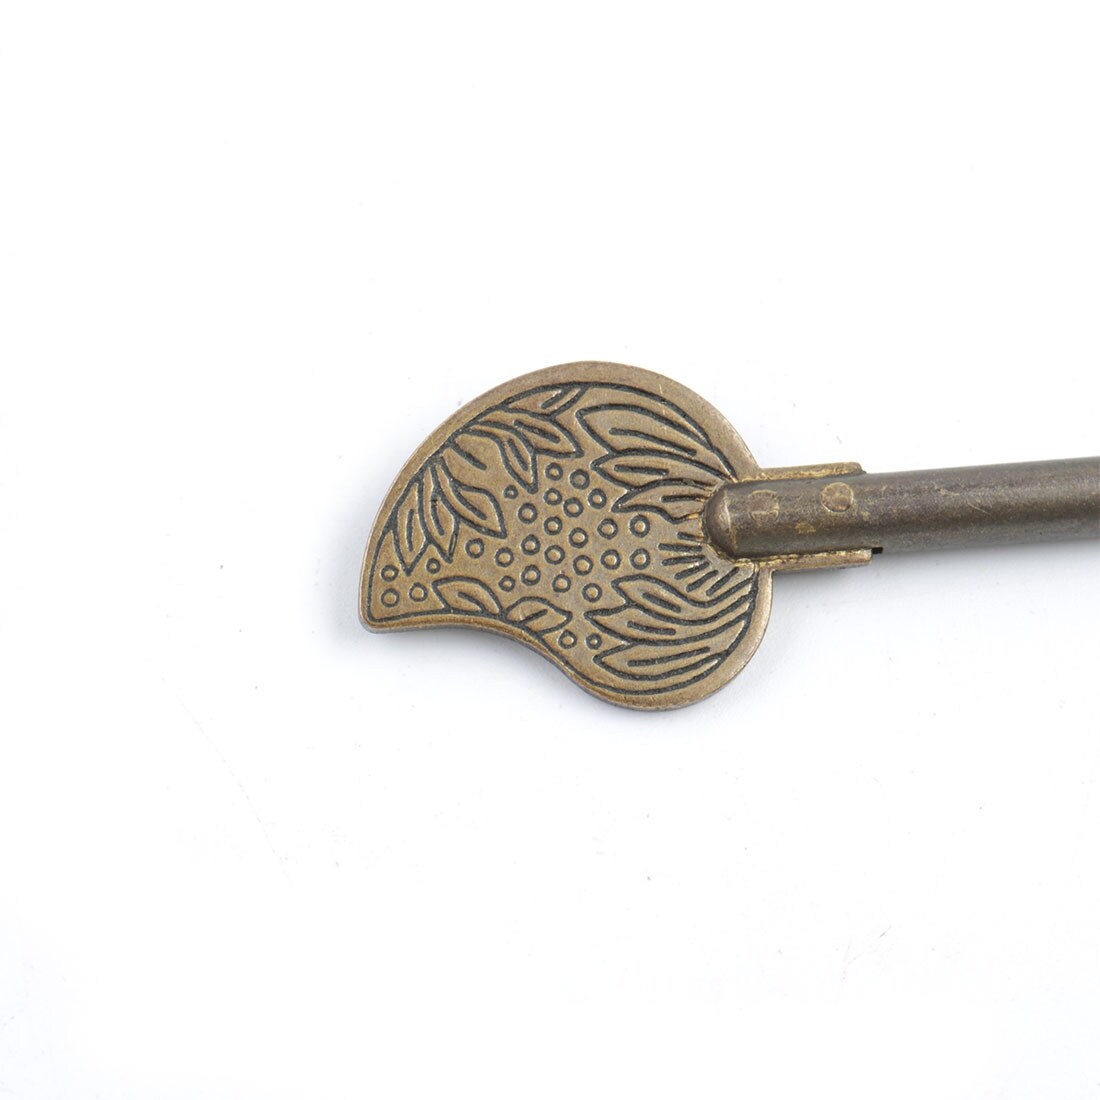 Traditional Chinese Brass Door Chest Cabinet Hardware Key Lock, 3.4